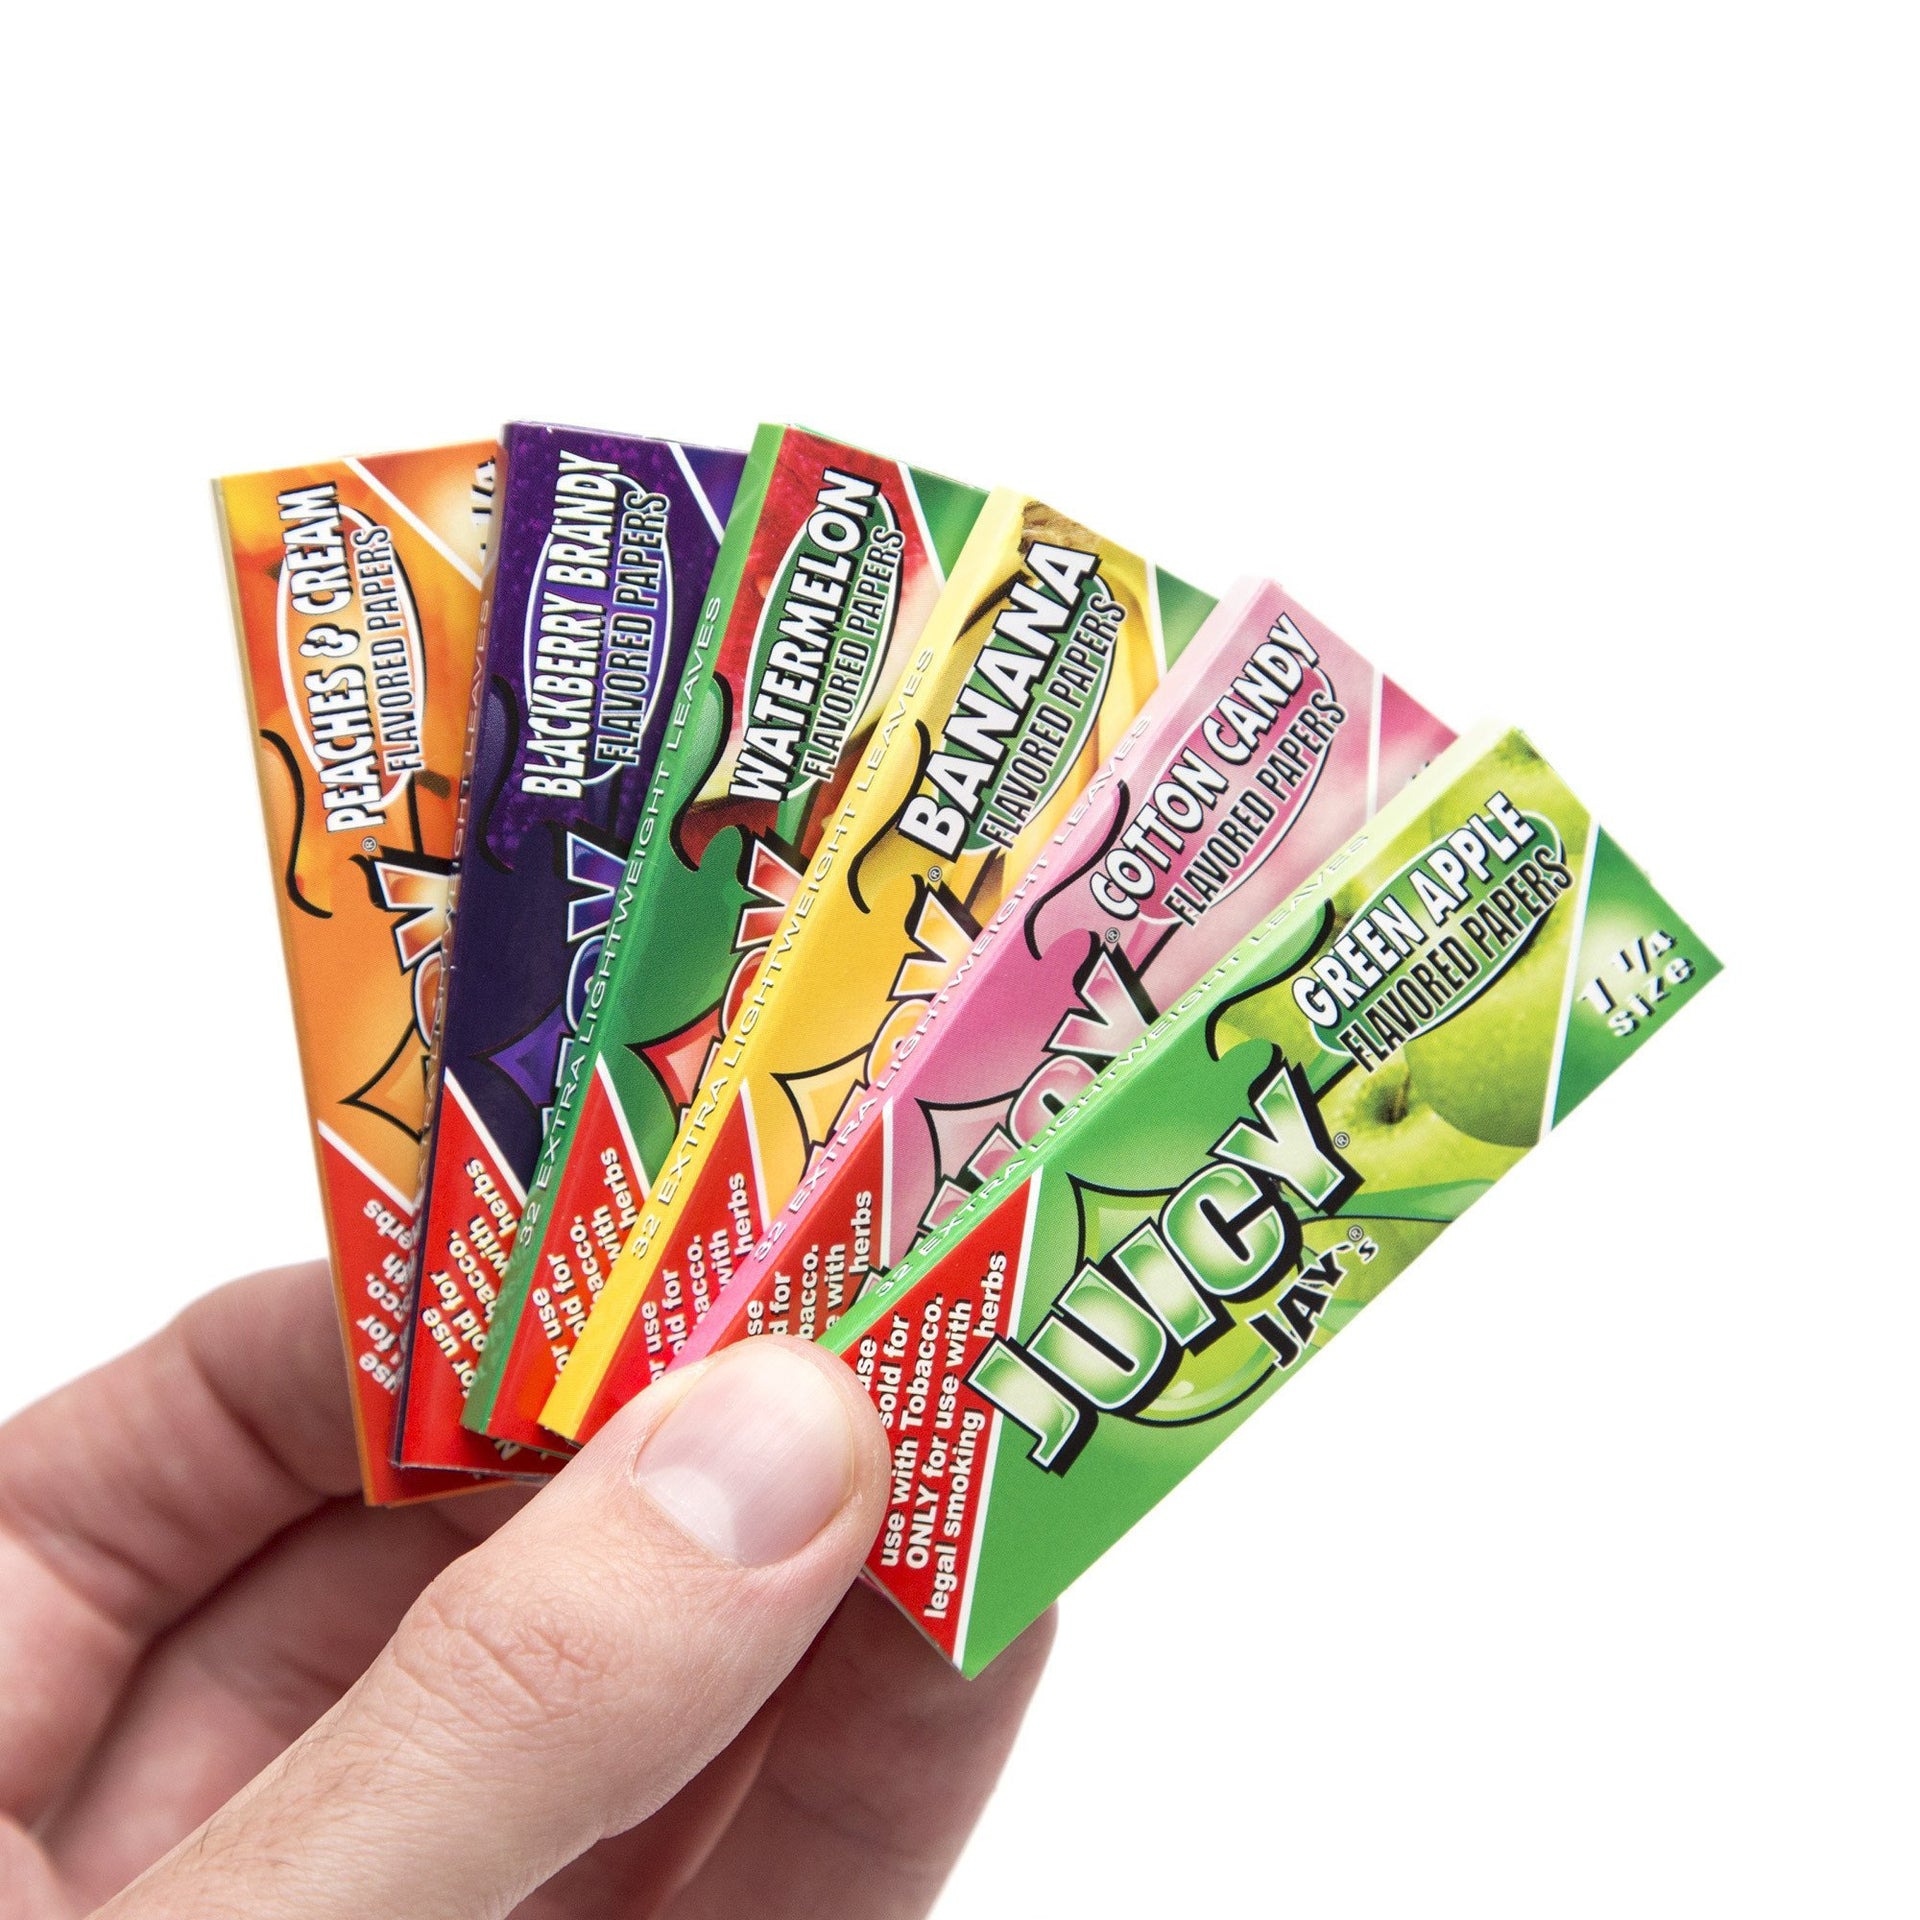 Juicy Jay's 1 1/4in Flavored Papers - Banana - 420 Science - The most trusted online smoke shop.